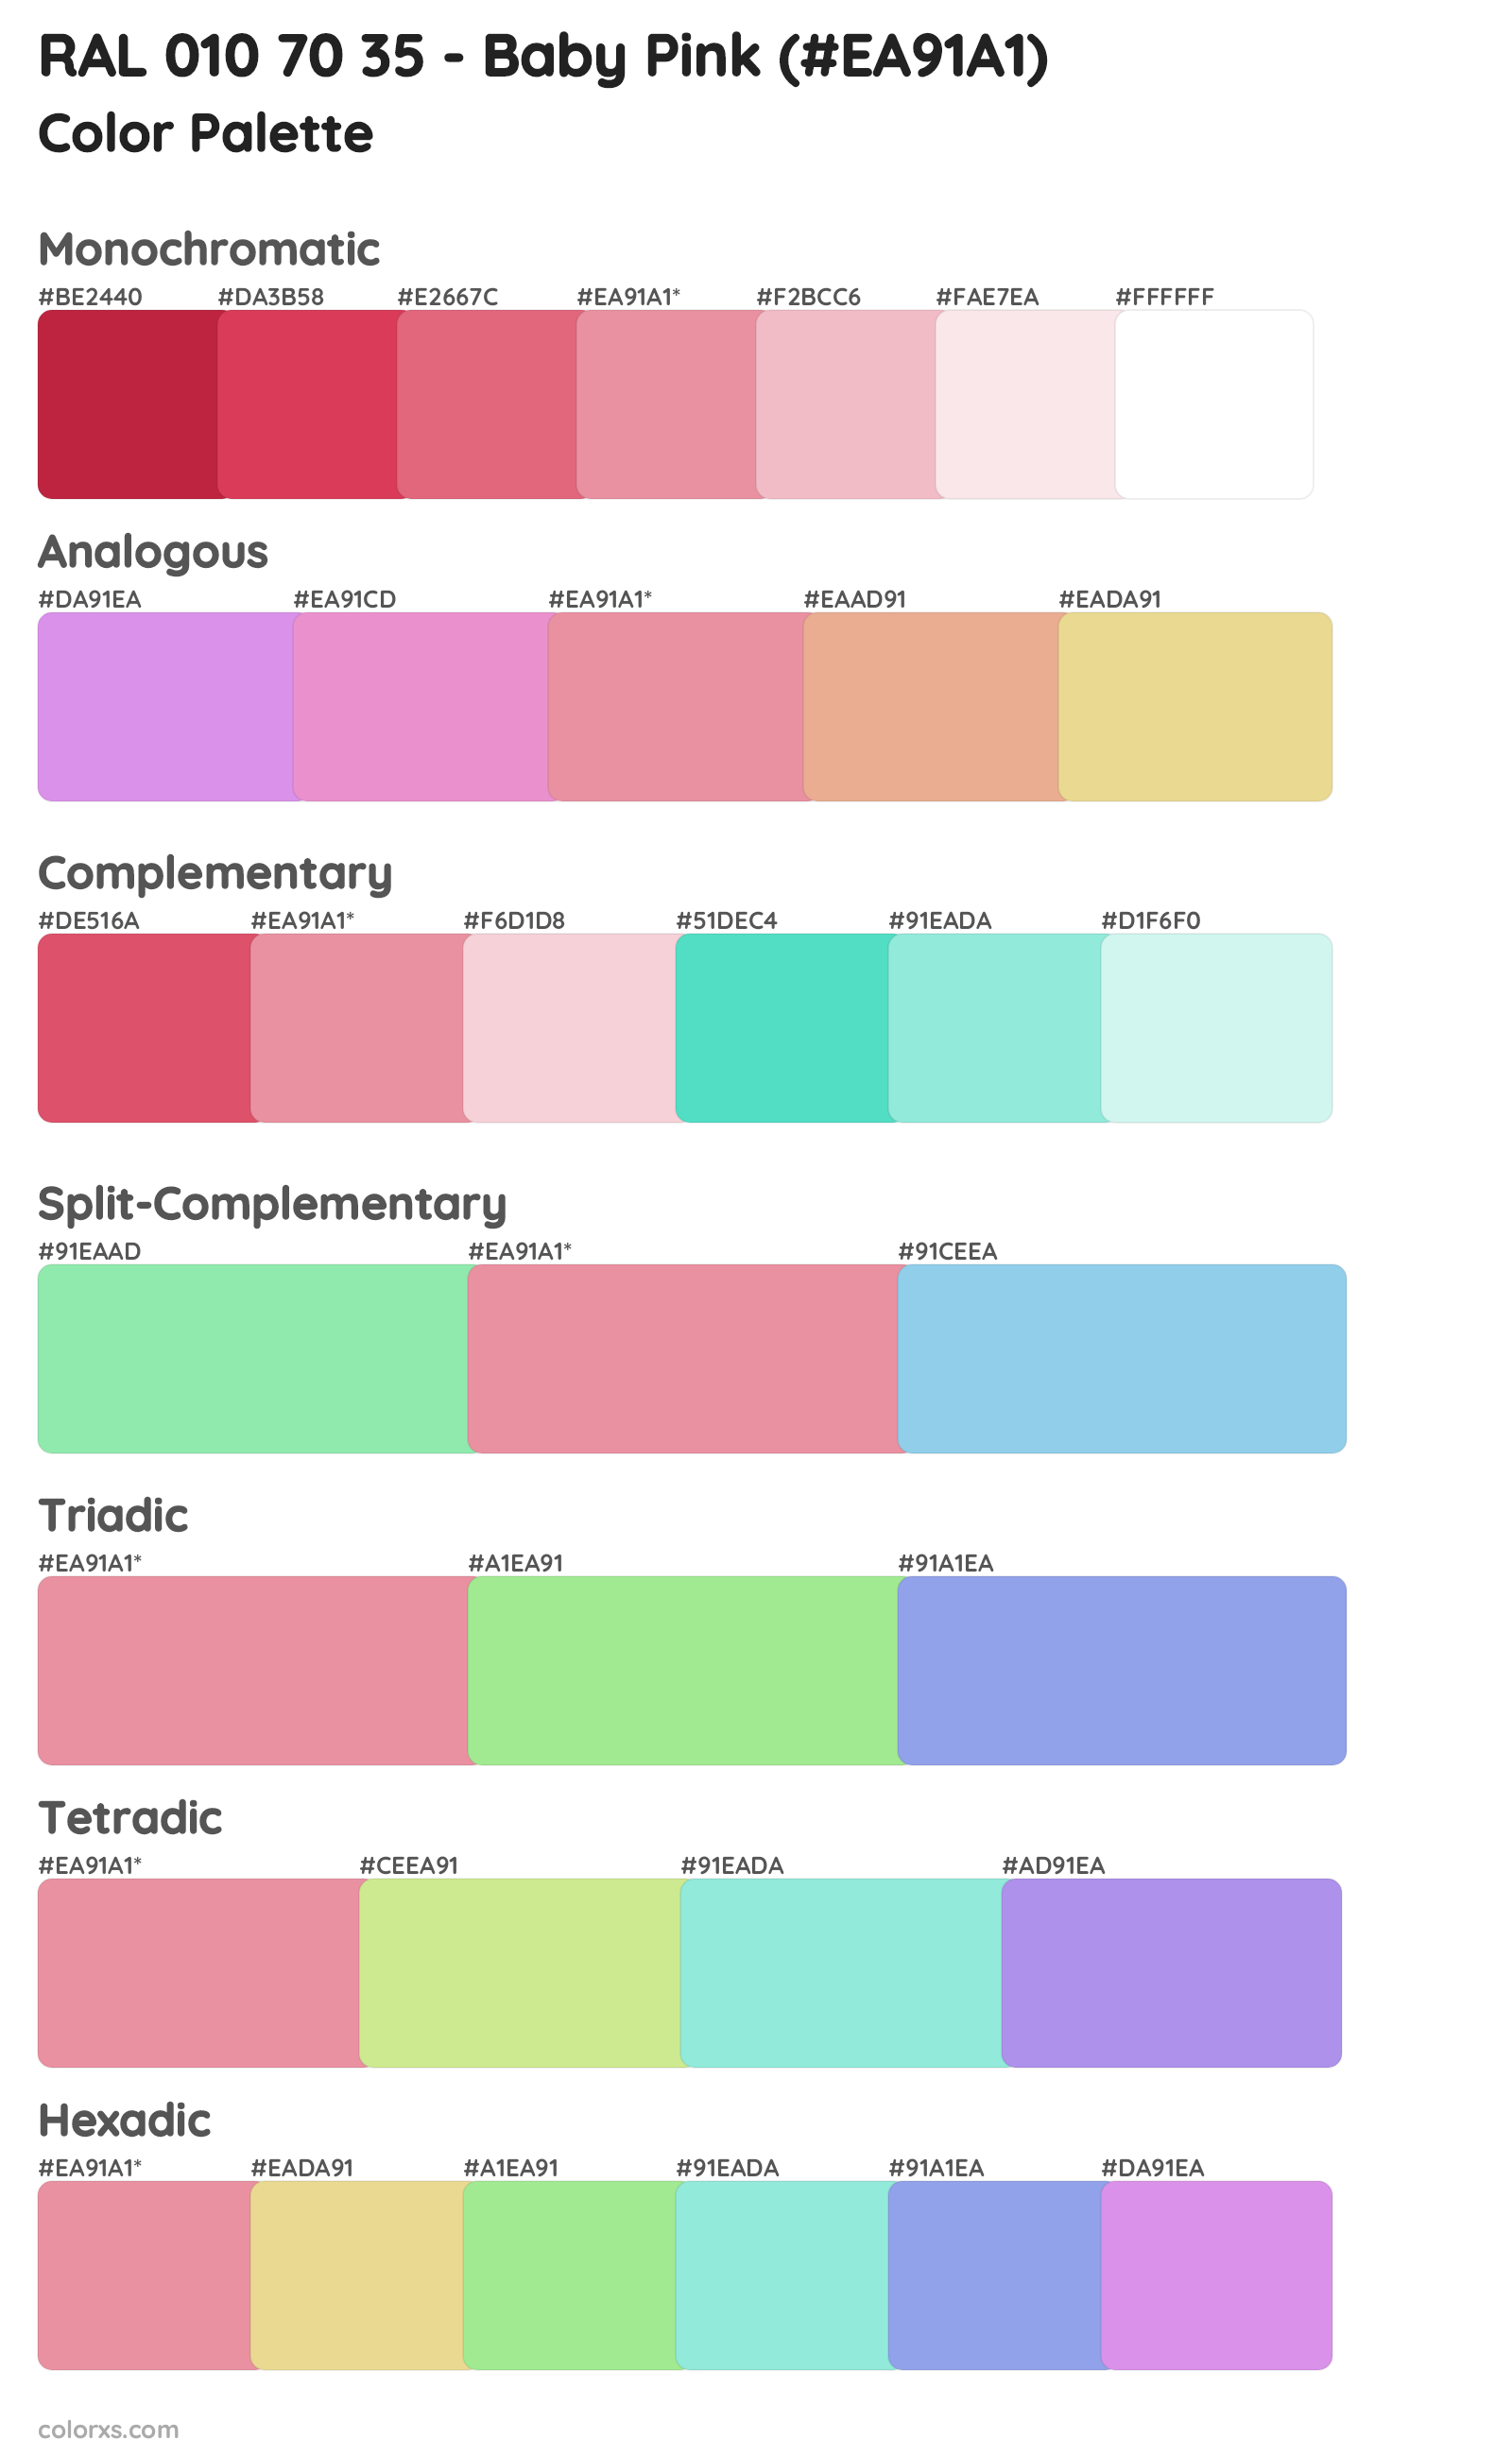 RAL 010 70 35 - Baby Pink Color Scheme Palettes